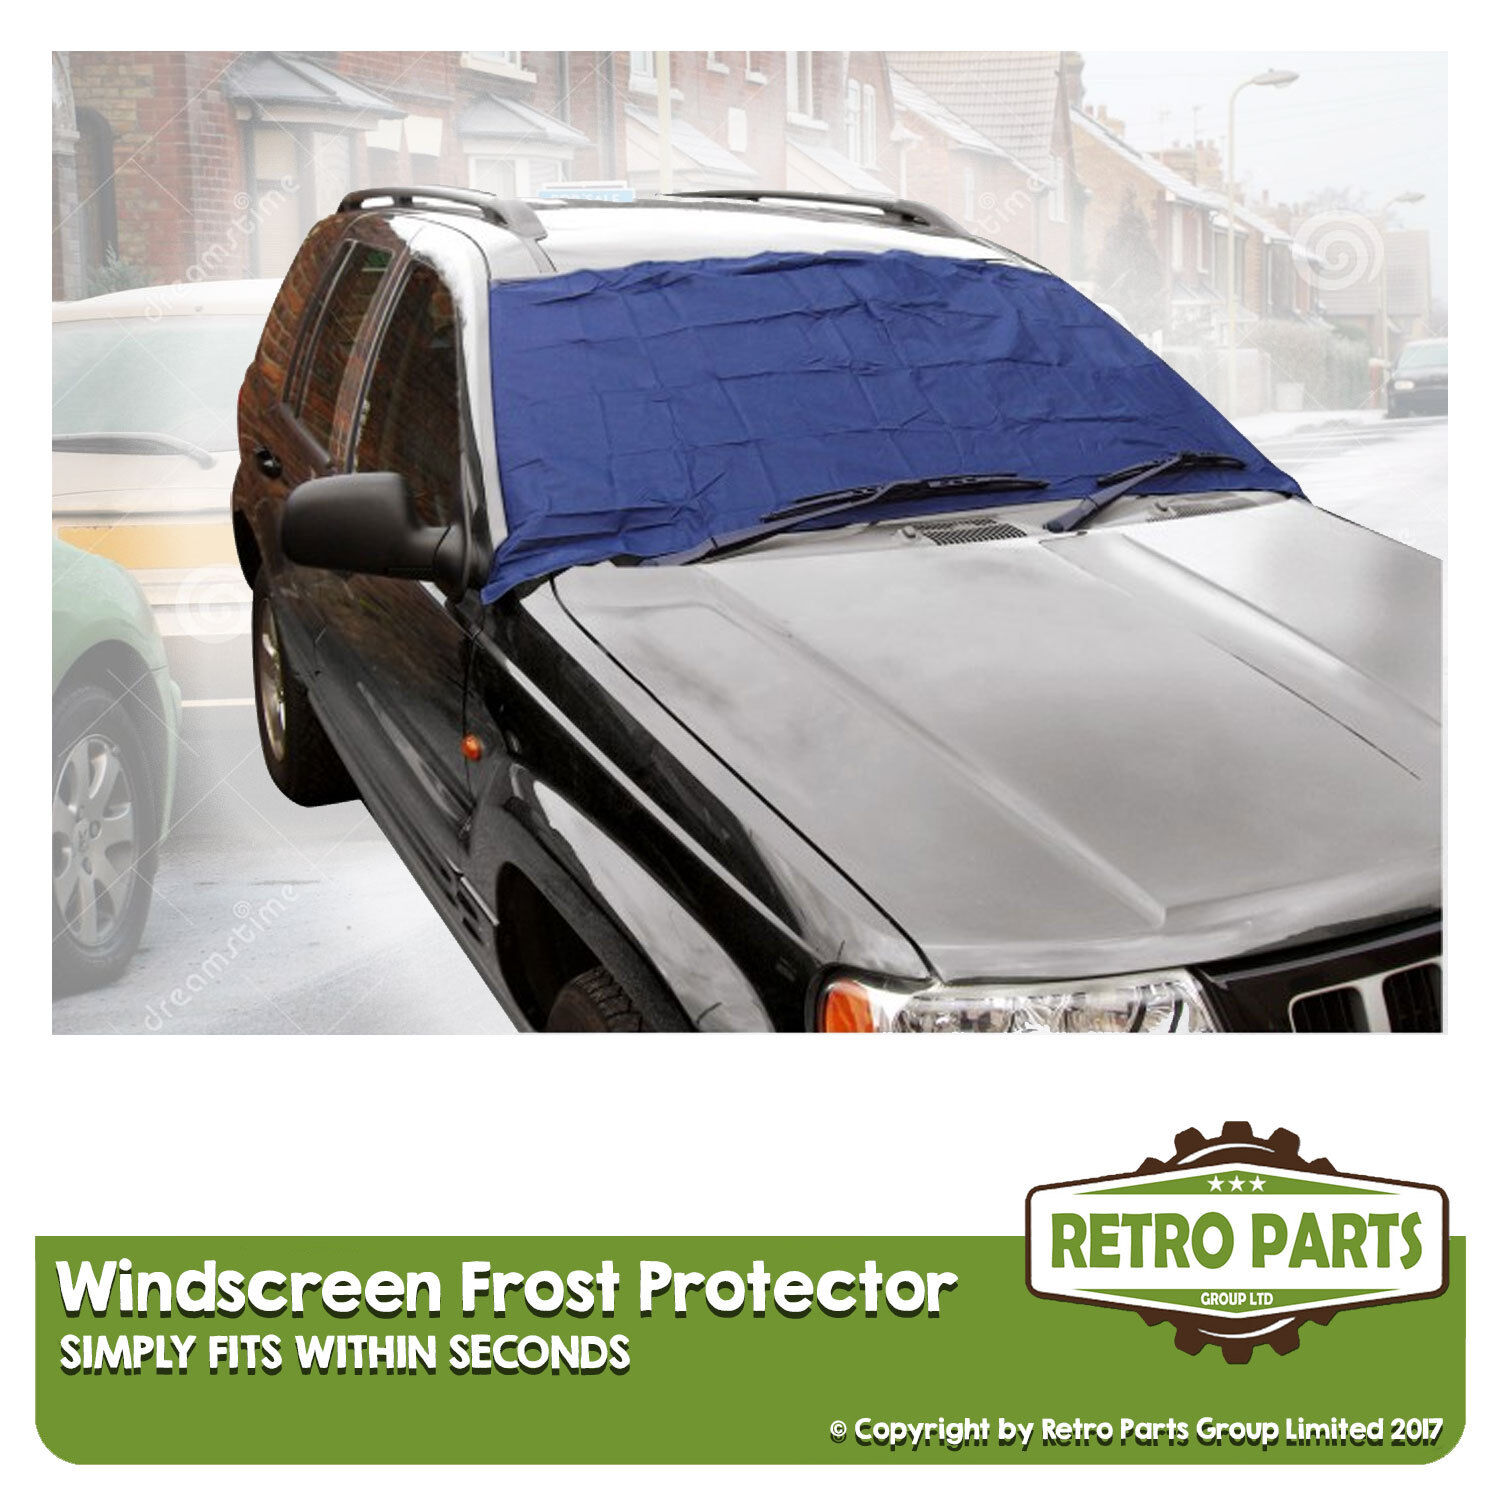 Windscreen Frost Protector for Toyota Cynos. Window Screen Snow Ice